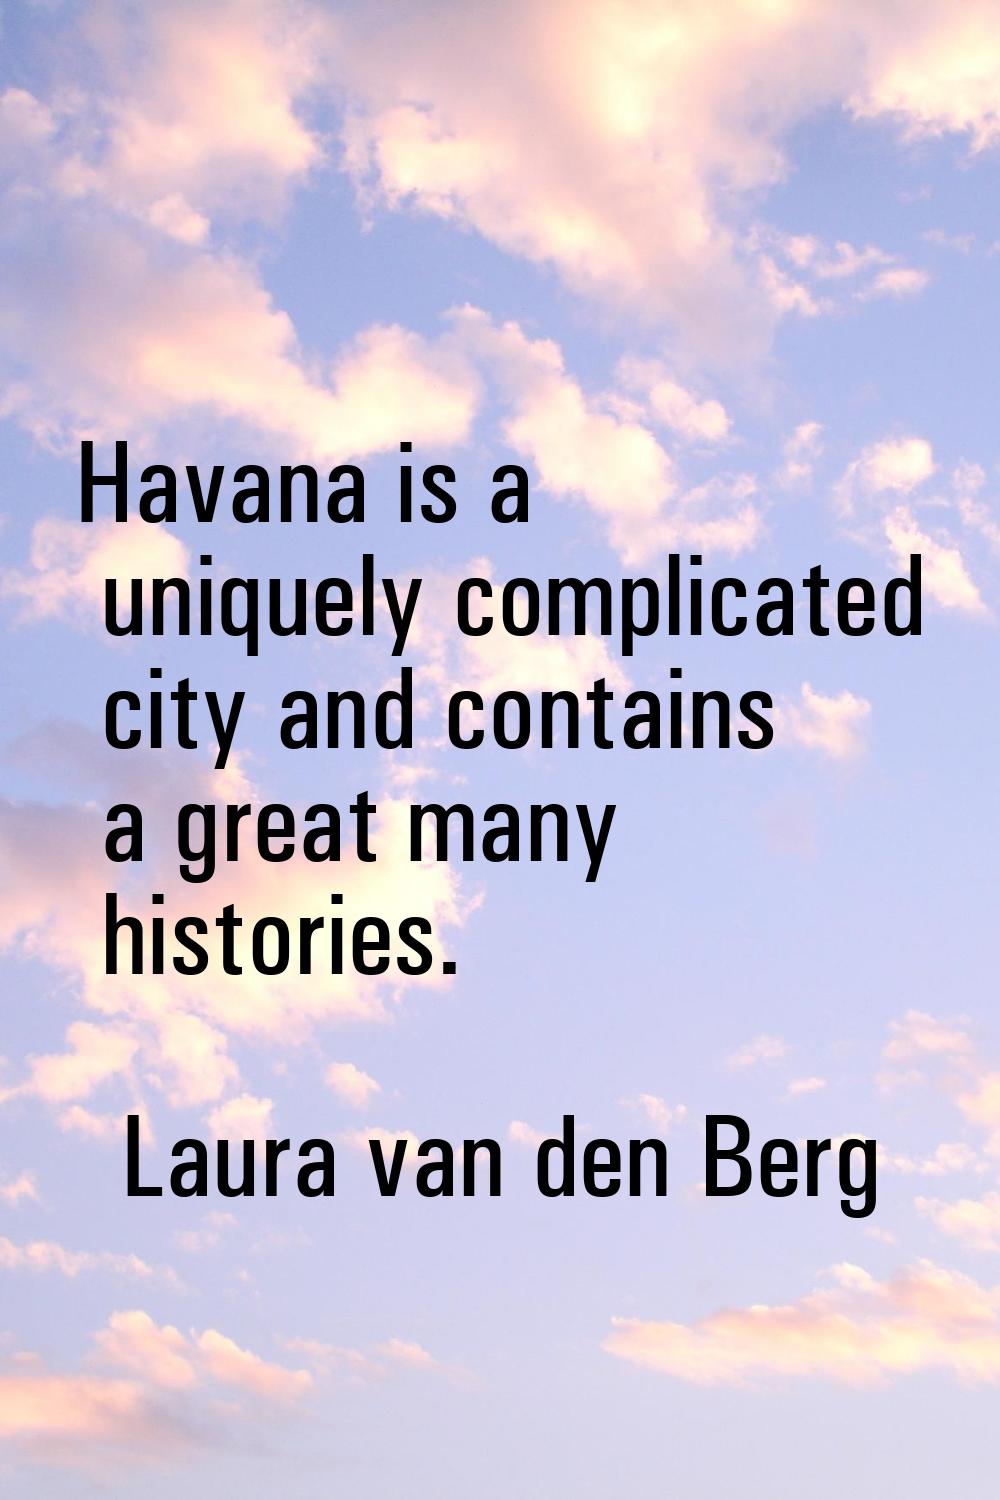 Havana is a uniquely complicated city and contains a great many histories.